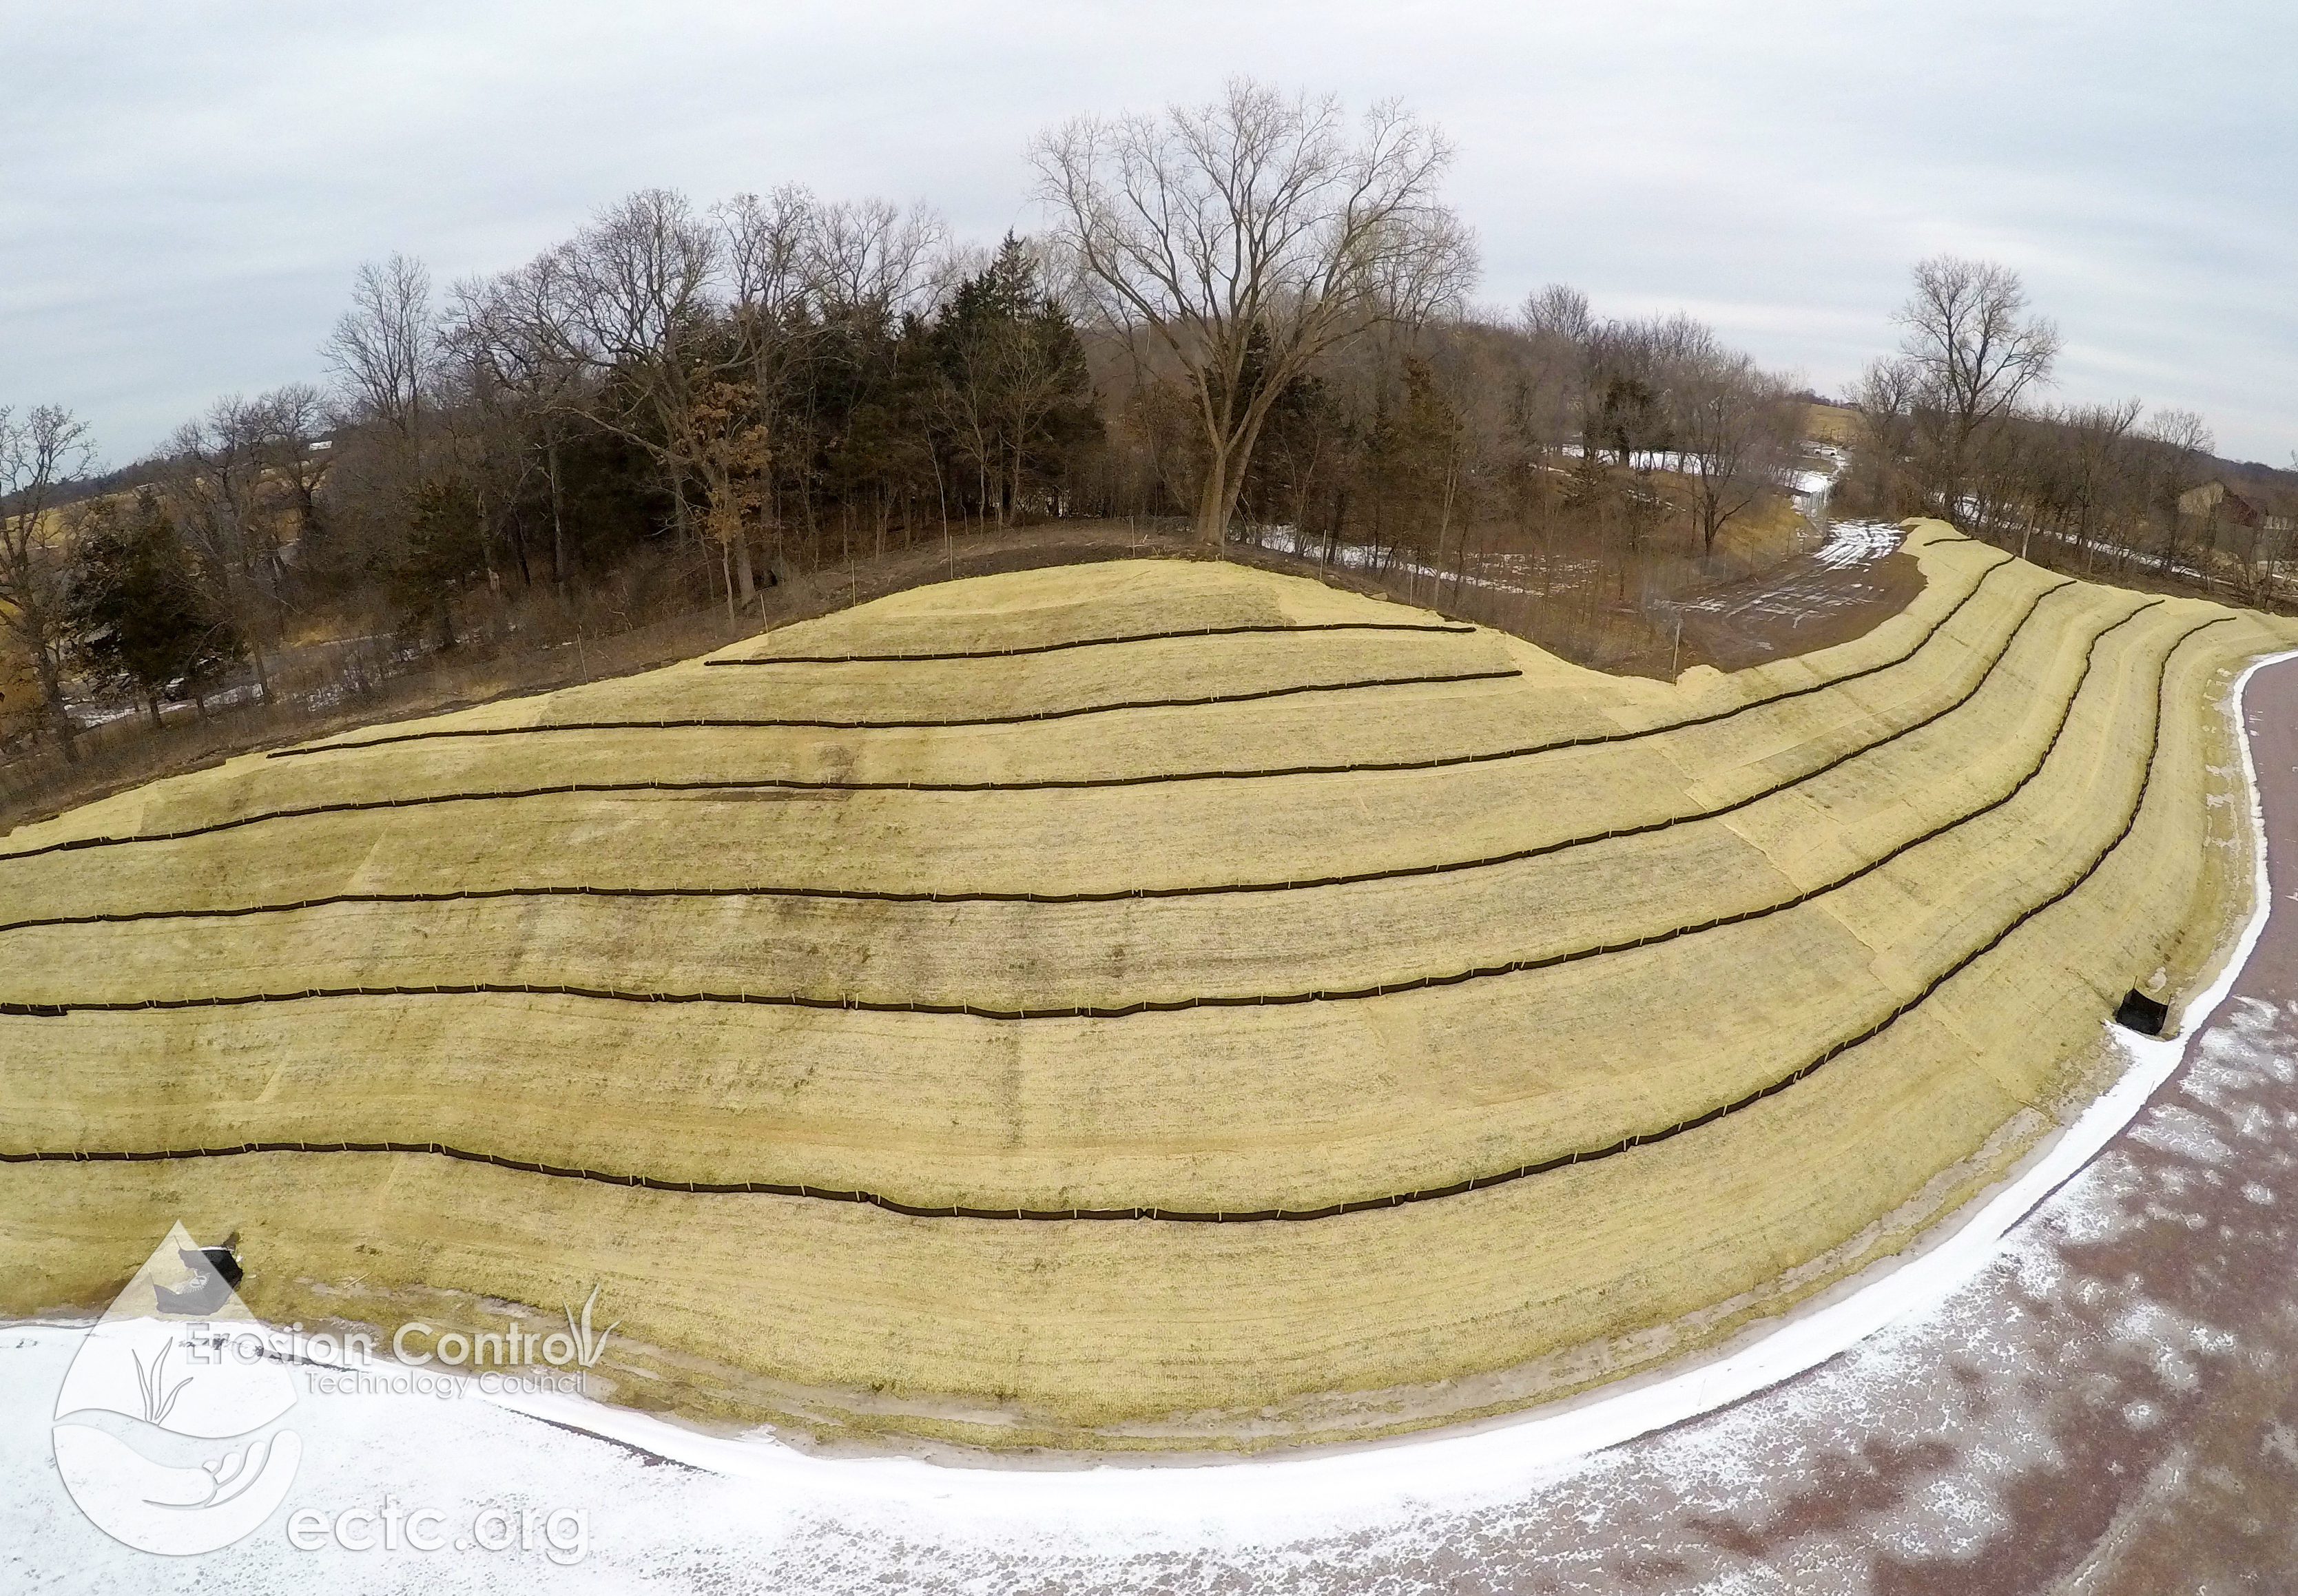 Rolled Erosion Control Blanket (RECP) and Sediment Retention Fiber Rolls (Wattles) are both used in this Installation